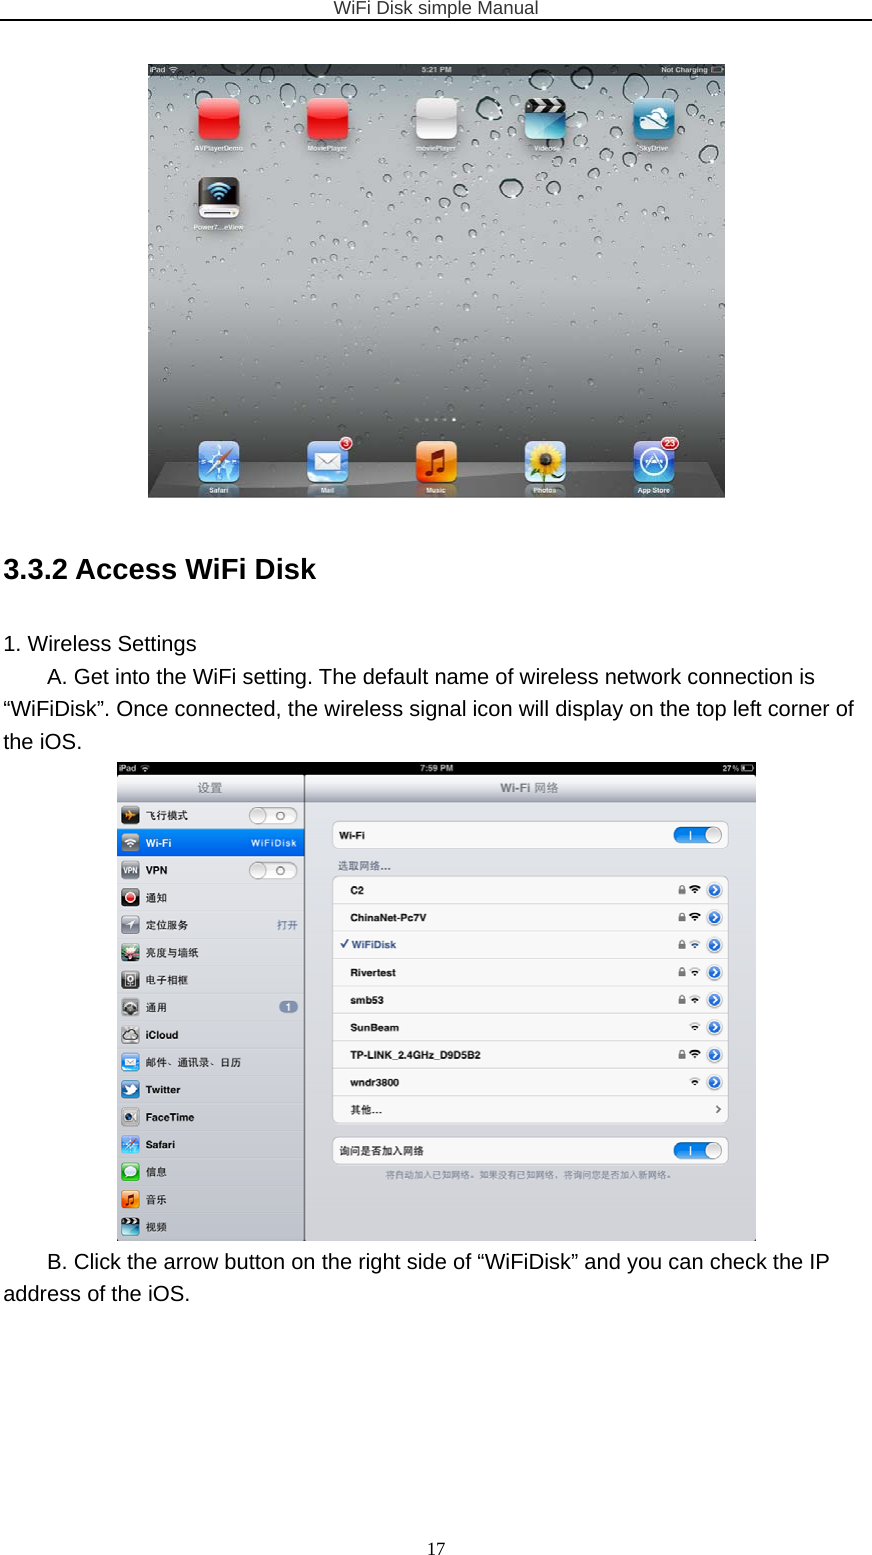 WiFi Disk simple Manual  17 3.3.2 Access WiFi Disk 1. Wireless Settings A. Get into the WiFi setting. The default name of wireless network connection is “WiFiDisk”. Once connected, the wireless signal icon will display on the top left corner of the iOS.  B. Click the arrow button on the right side of “WiFiDisk” and you can check the IP address of the iOS. 